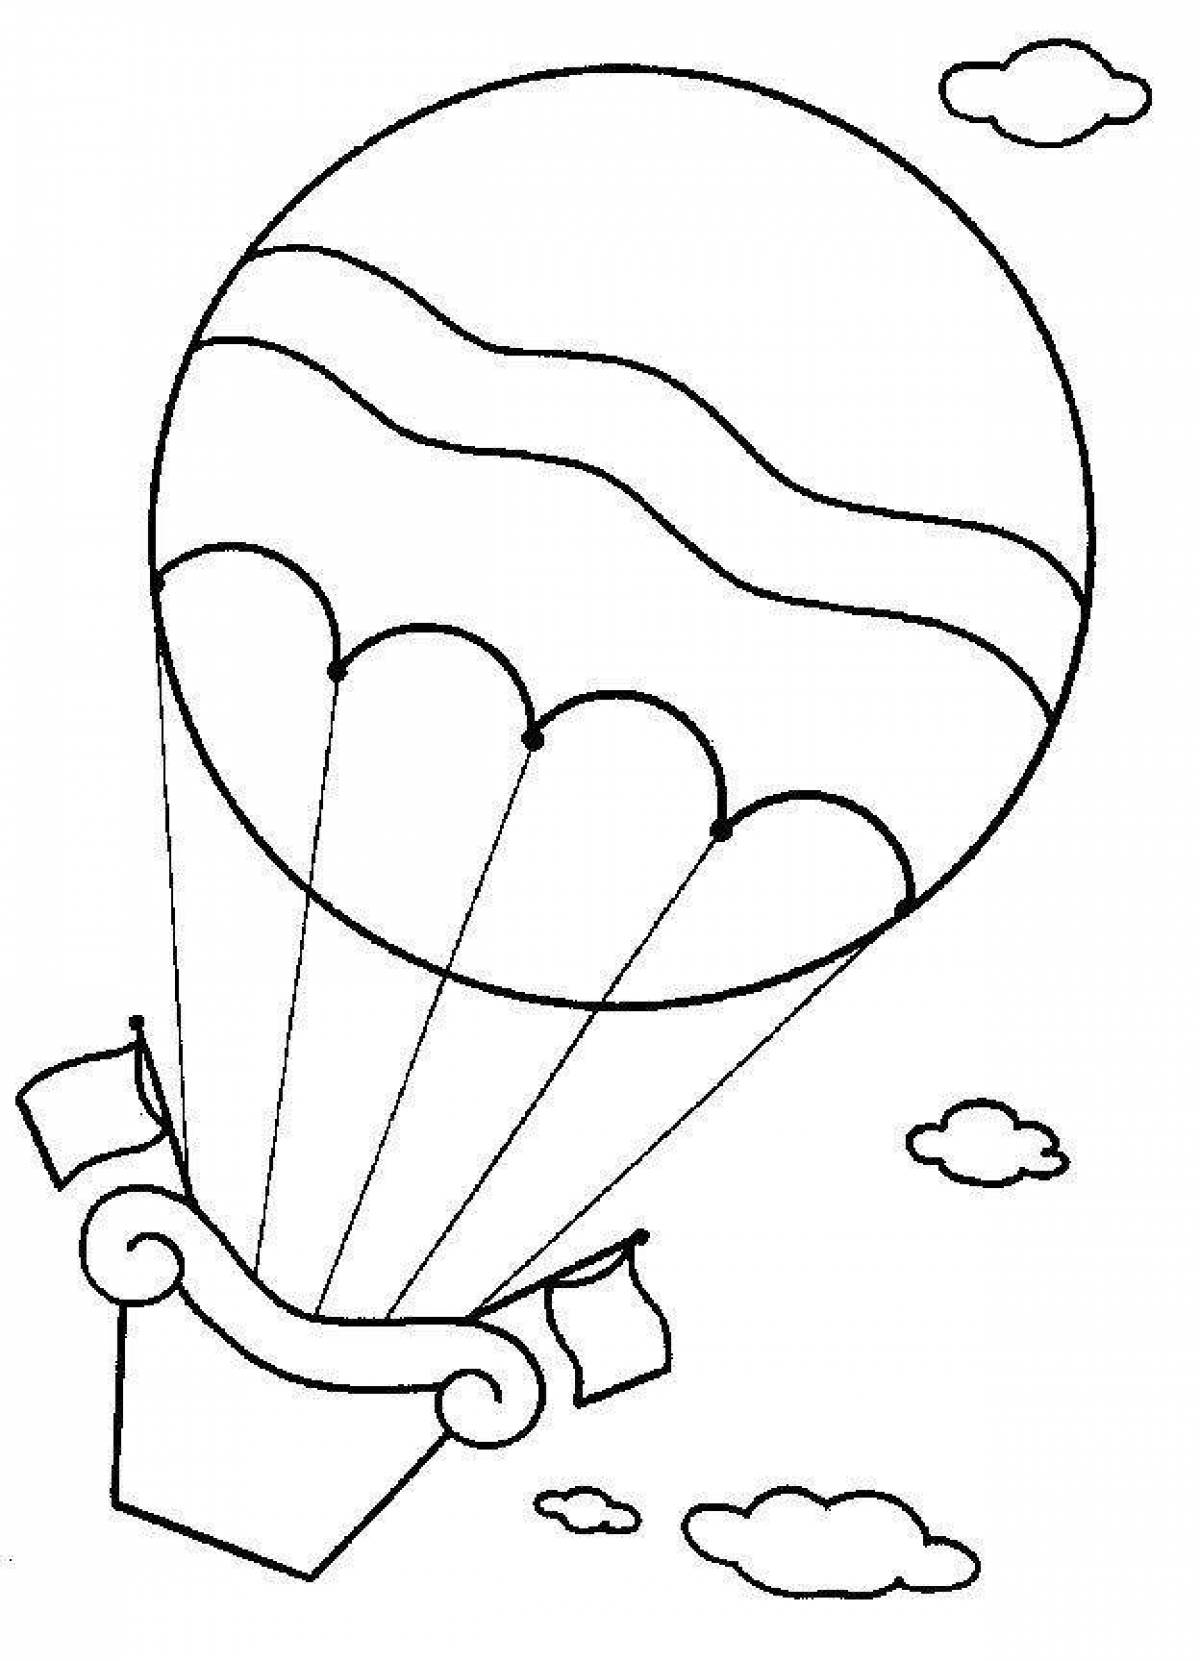 Shining balloon coloring book for kids